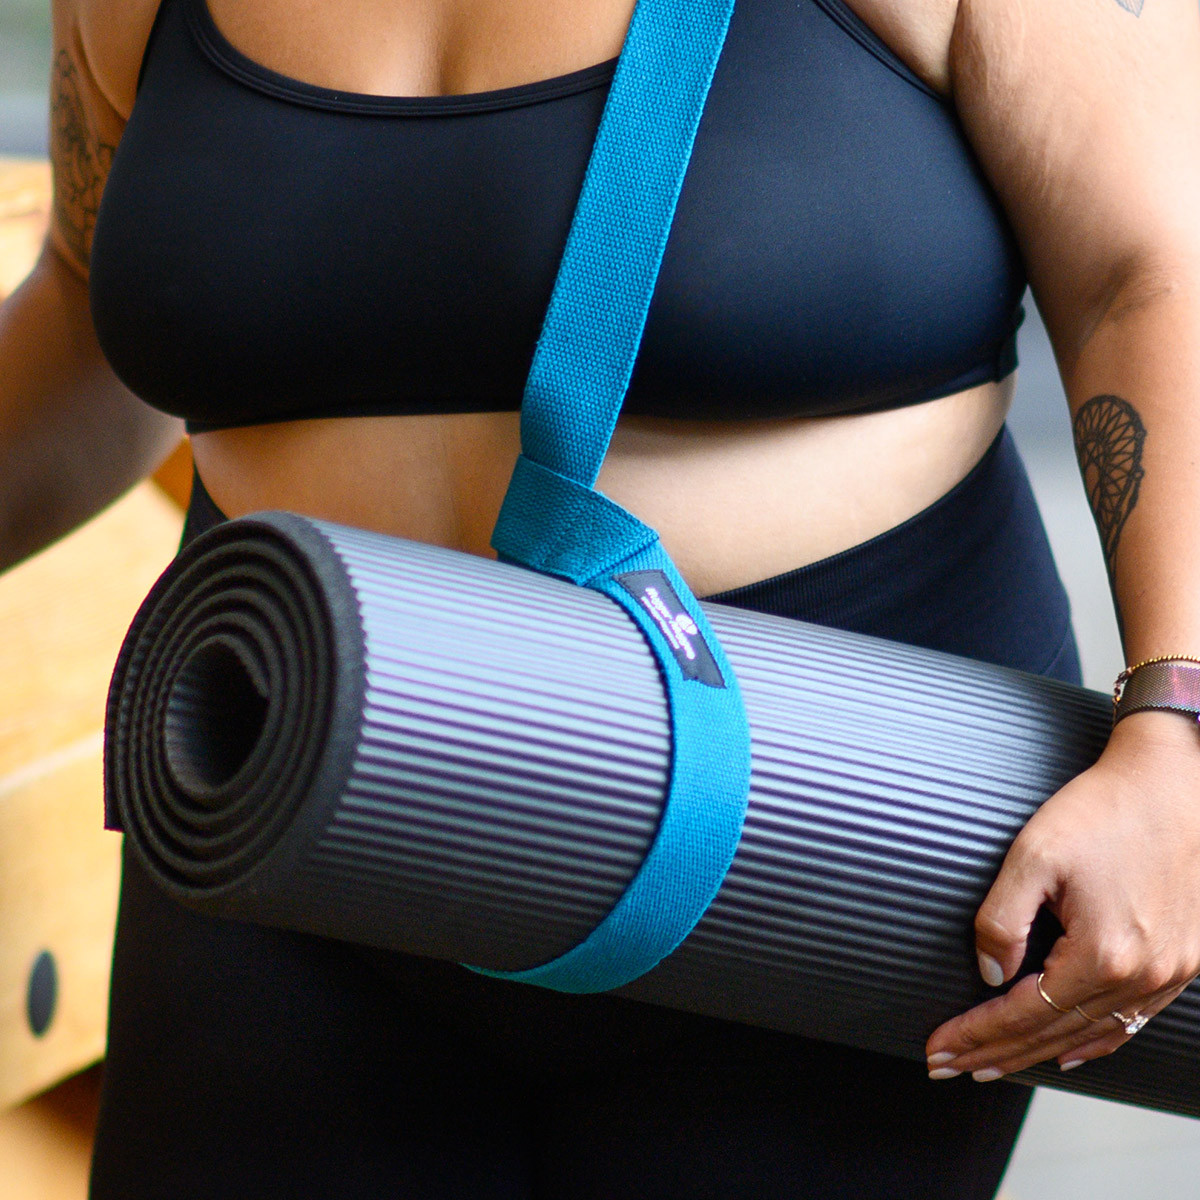 The ways to use a yoga strap - Hugger Mugger Yoga Products